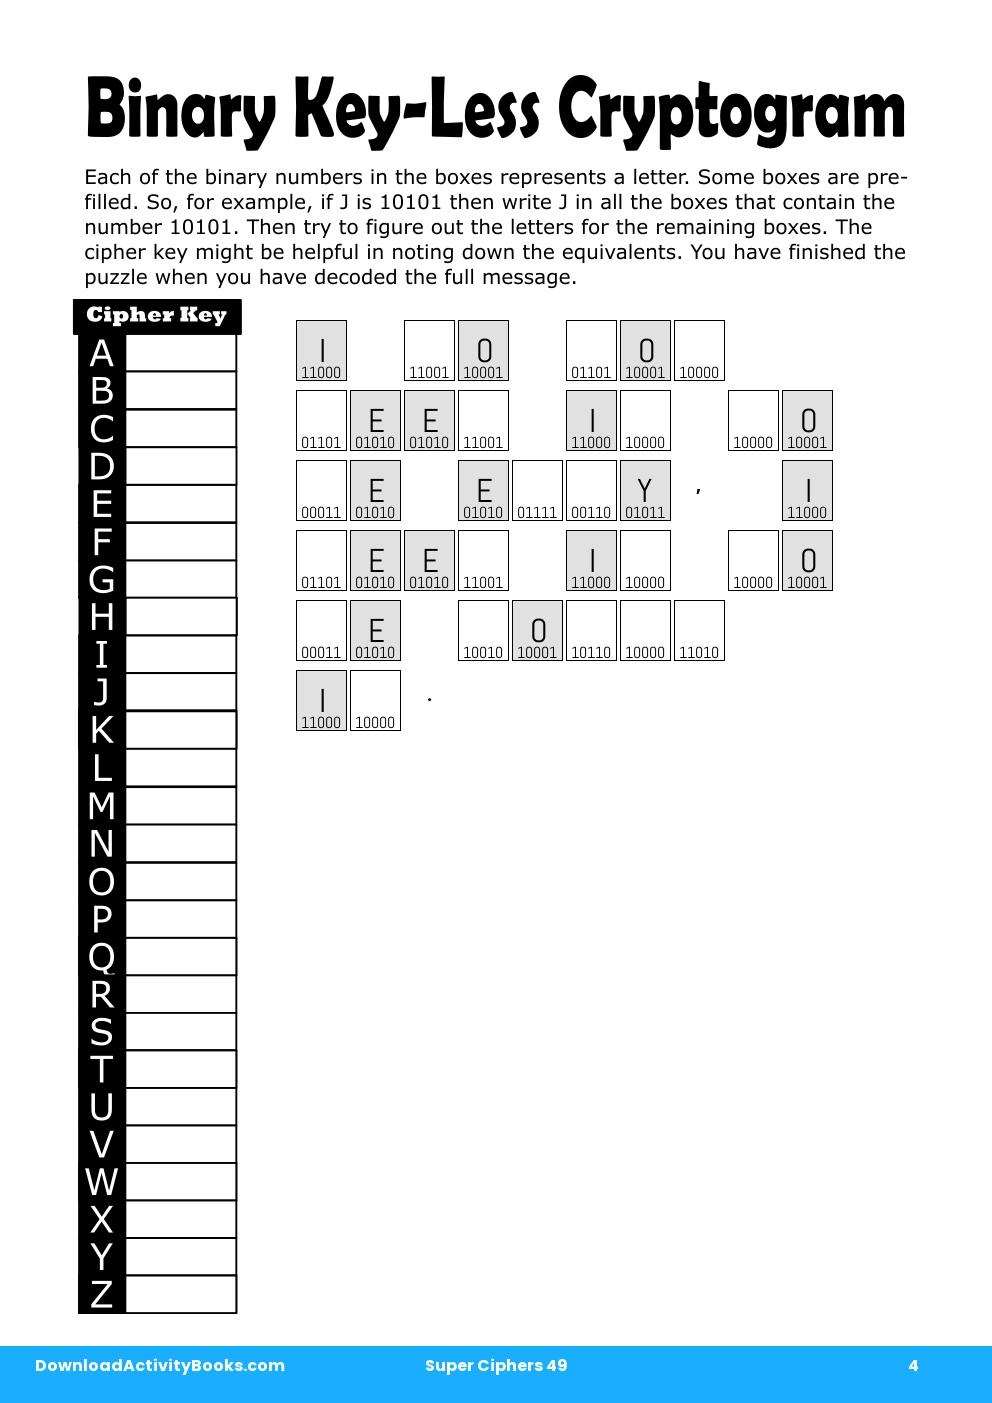 Binary Key-Less Cryptogram in Super Ciphers 49